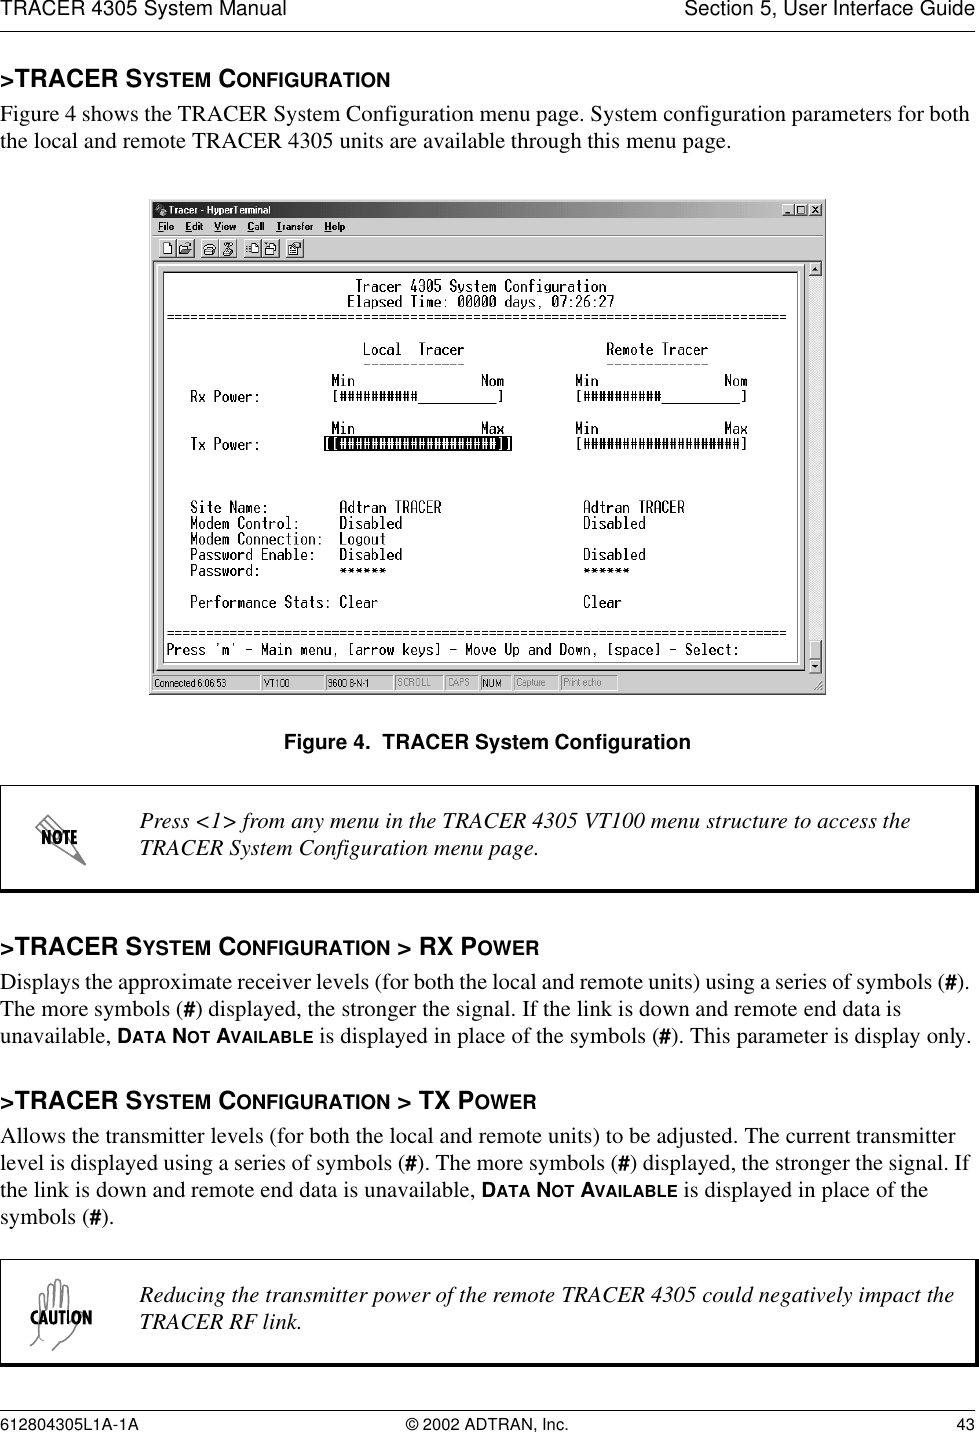 TRACER 4305 System Manual Section 5, User Interface Guide612804305L1A-1A © 2002 ADTRAN, Inc. 43&gt;TRACER SYSTEM CONFIGURATIONFigure 4 shows the TRACER System Configuration menu page. System configuration parameters for both the local and remote TRACER 4305 units are available through this menu page.Figure 4.  TRACER System Configuration&gt;TRACER SYSTEM CONFIGURATION &gt; RX POWERDisplays the approximate receiver levels (for both the local and remote units) using a series of symbols (#). The more symbols (#) displayed, the stronger the signal. If the link is down and remote end data is unavailable, DATA NOT AVAILABLE is displayed in place of the symbols (#). This parameter is display only.&gt;TRACER SYSTEM CONFIGURATION &gt; TX POWERAllows the transmitter levels (for both the local and remote units) to be adjusted. The current transmitter level is displayed using a series of symbols (#). The more symbols (#) displayed, the stronger the signal. If the link is down and remote end data is unavailable, DATA NOT AVAILABLE is displayed in place of the symbols (#).Press &lt;1&gt; from any menu in the TRACER 4305 VT100 menu structure to access the TRACER System Configuration menu page.Reducing the transmitter power of the remote TRACER 4305 could negatively impact the TRACER RF link.